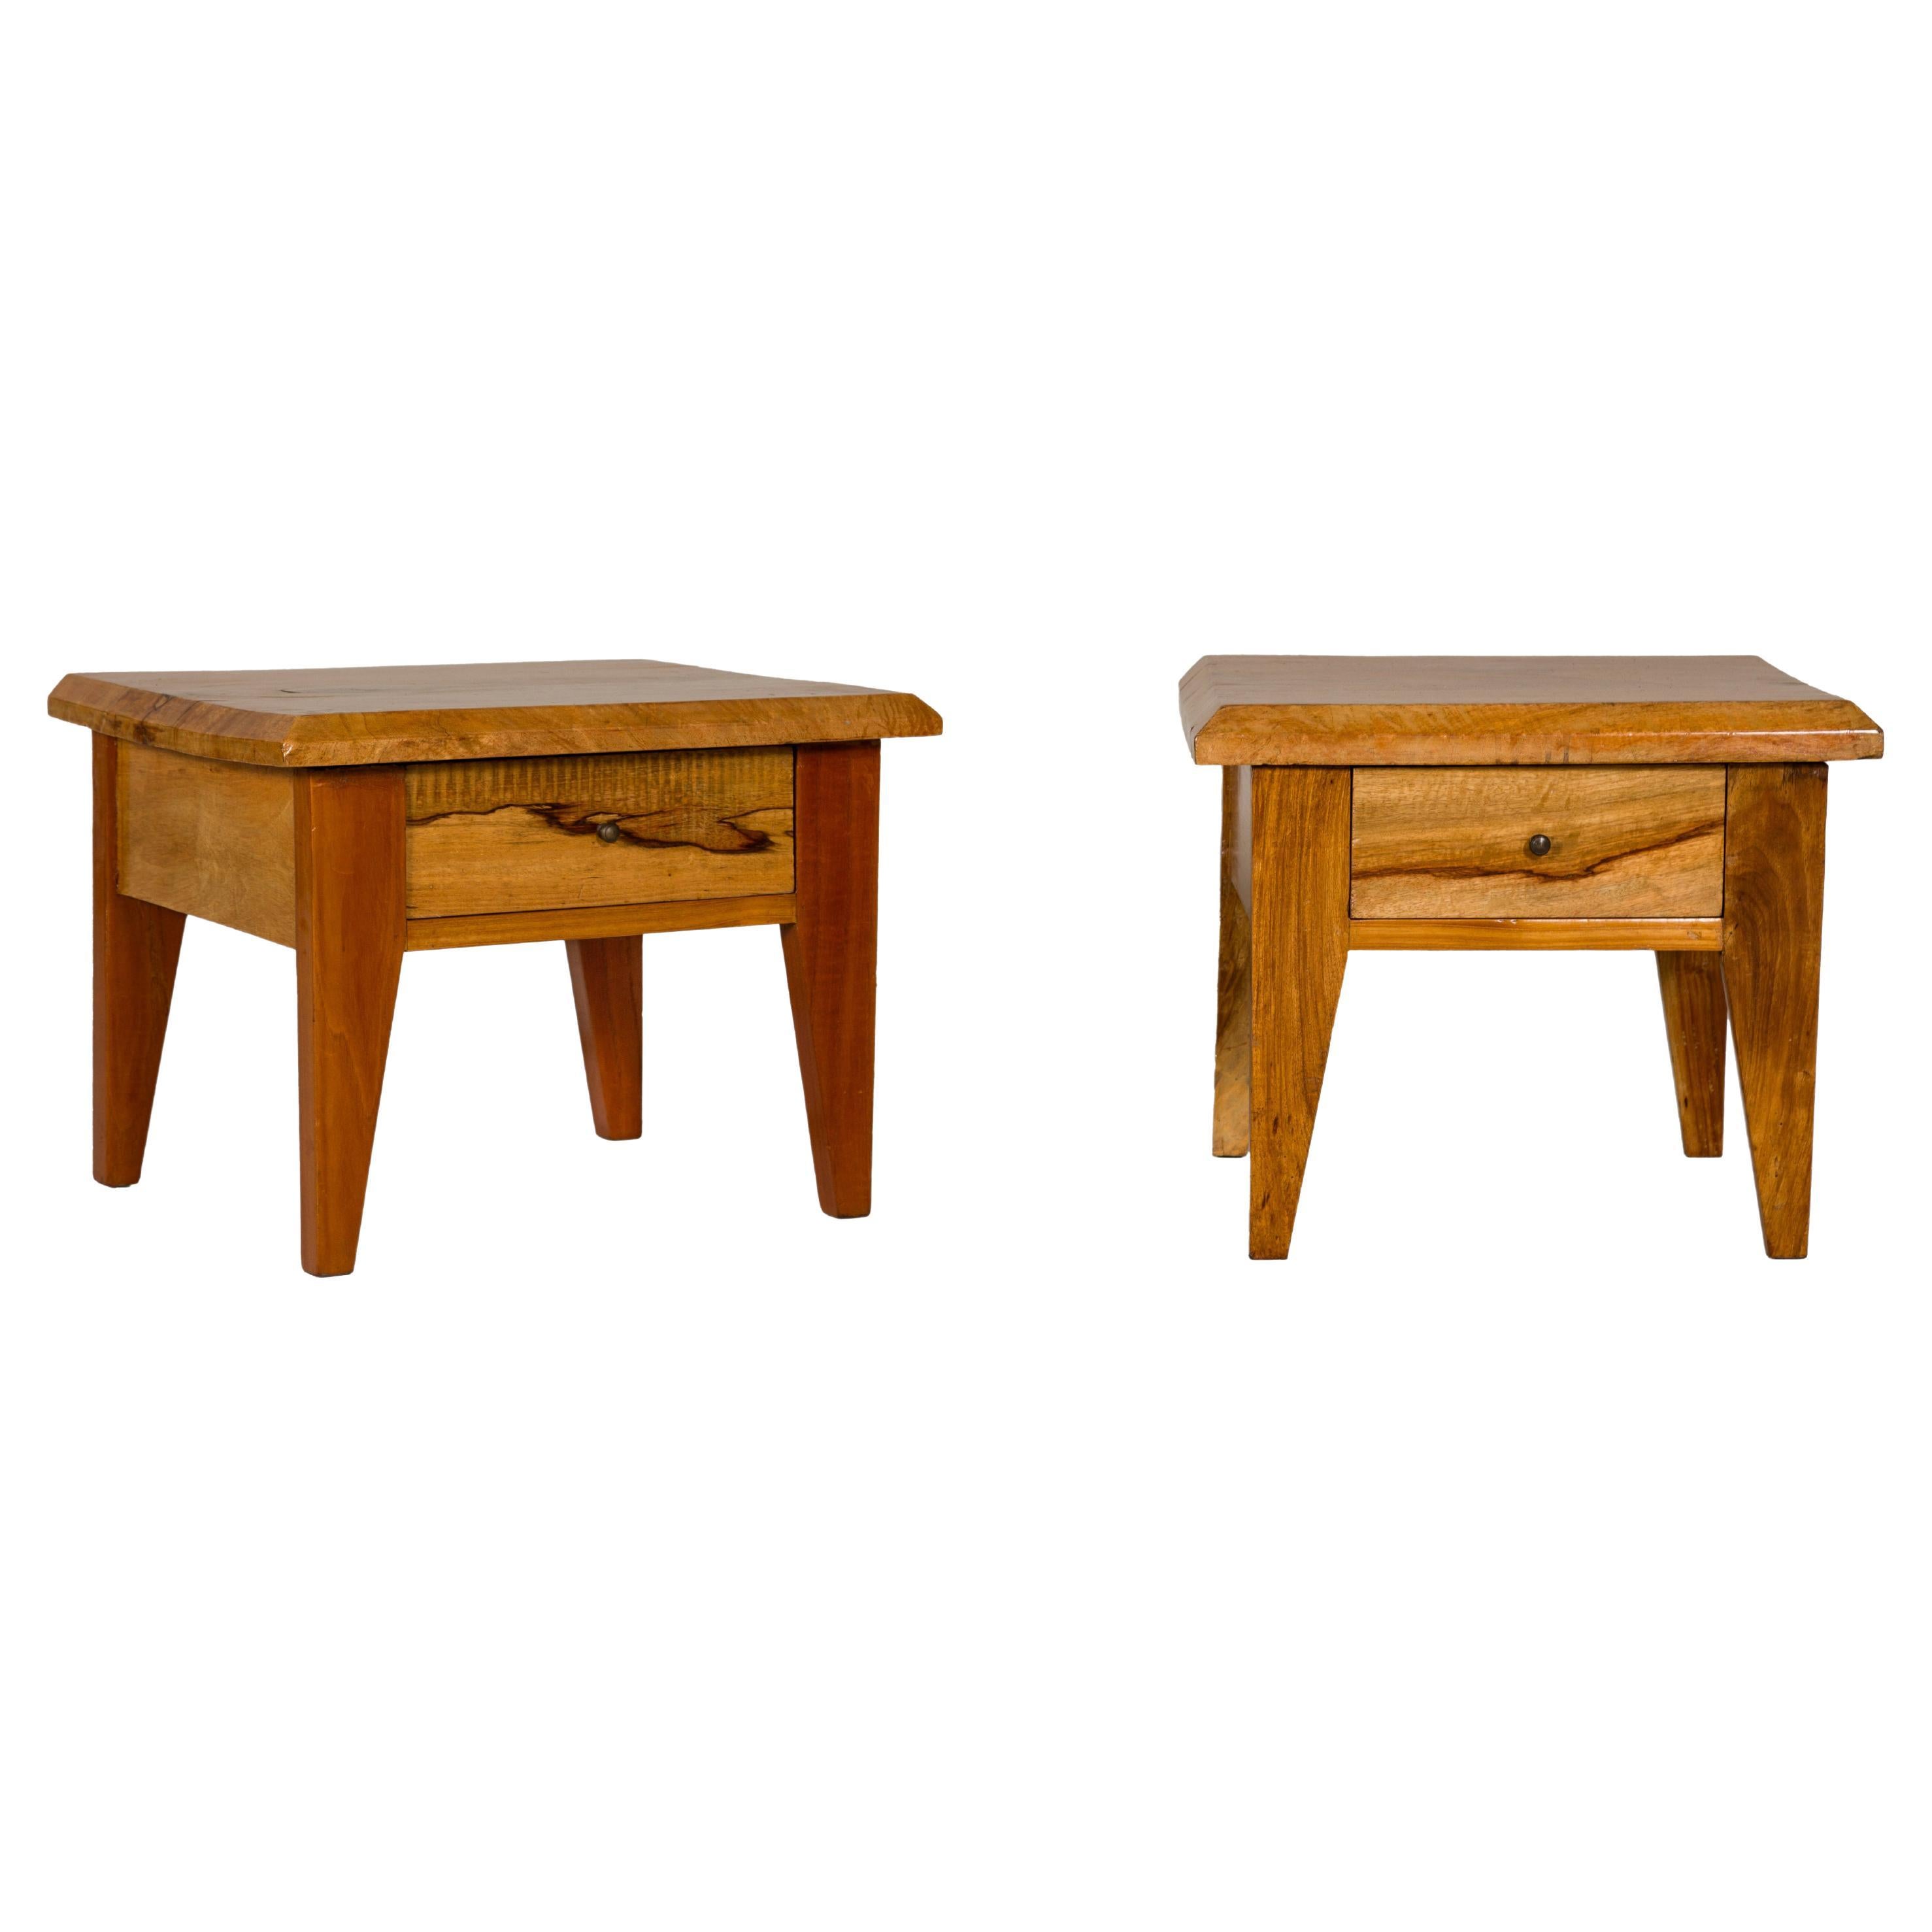 Near Pair of Mango Wood Midcentury Low Side Tables with Single Drawers For Sale